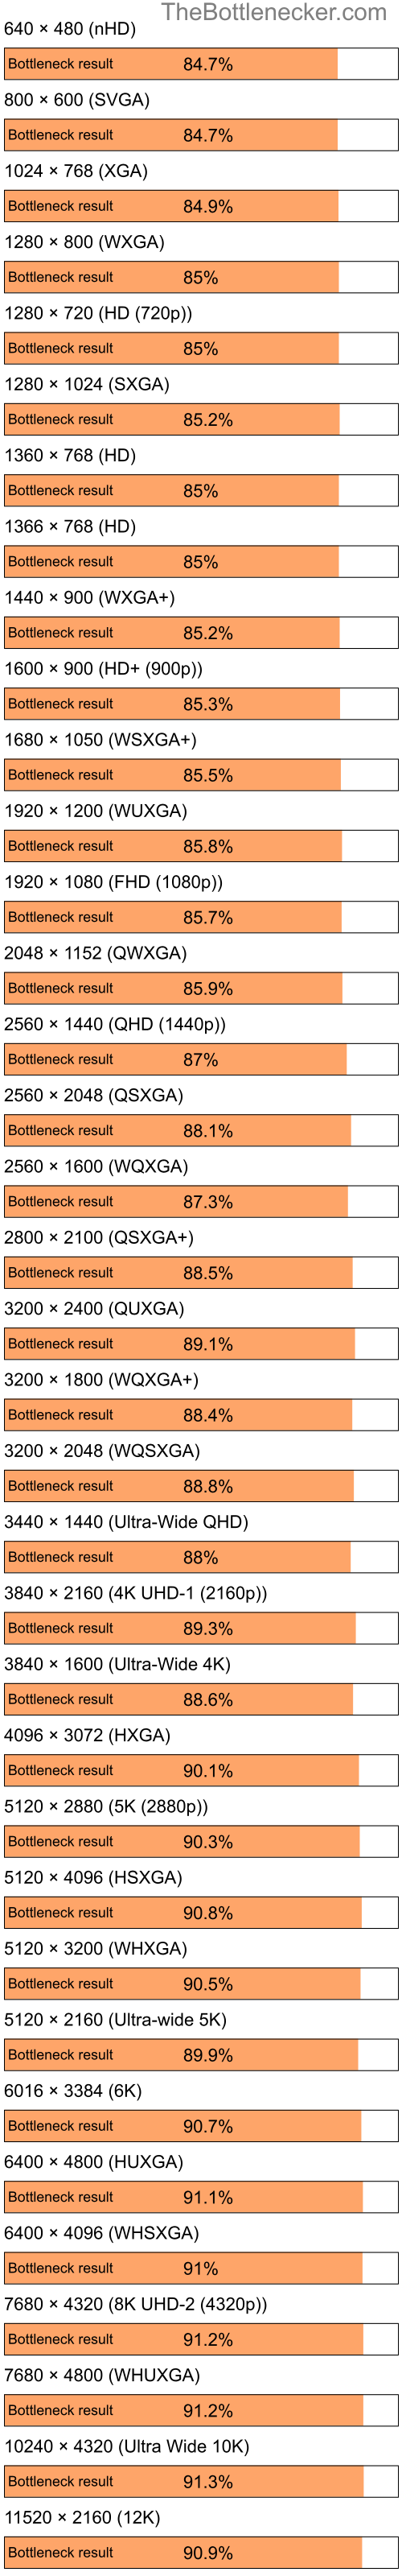 Bottleneck results by resolution for Intel Celeron and NVIDIA nForce 630M in Graphic Card Intense Tasks